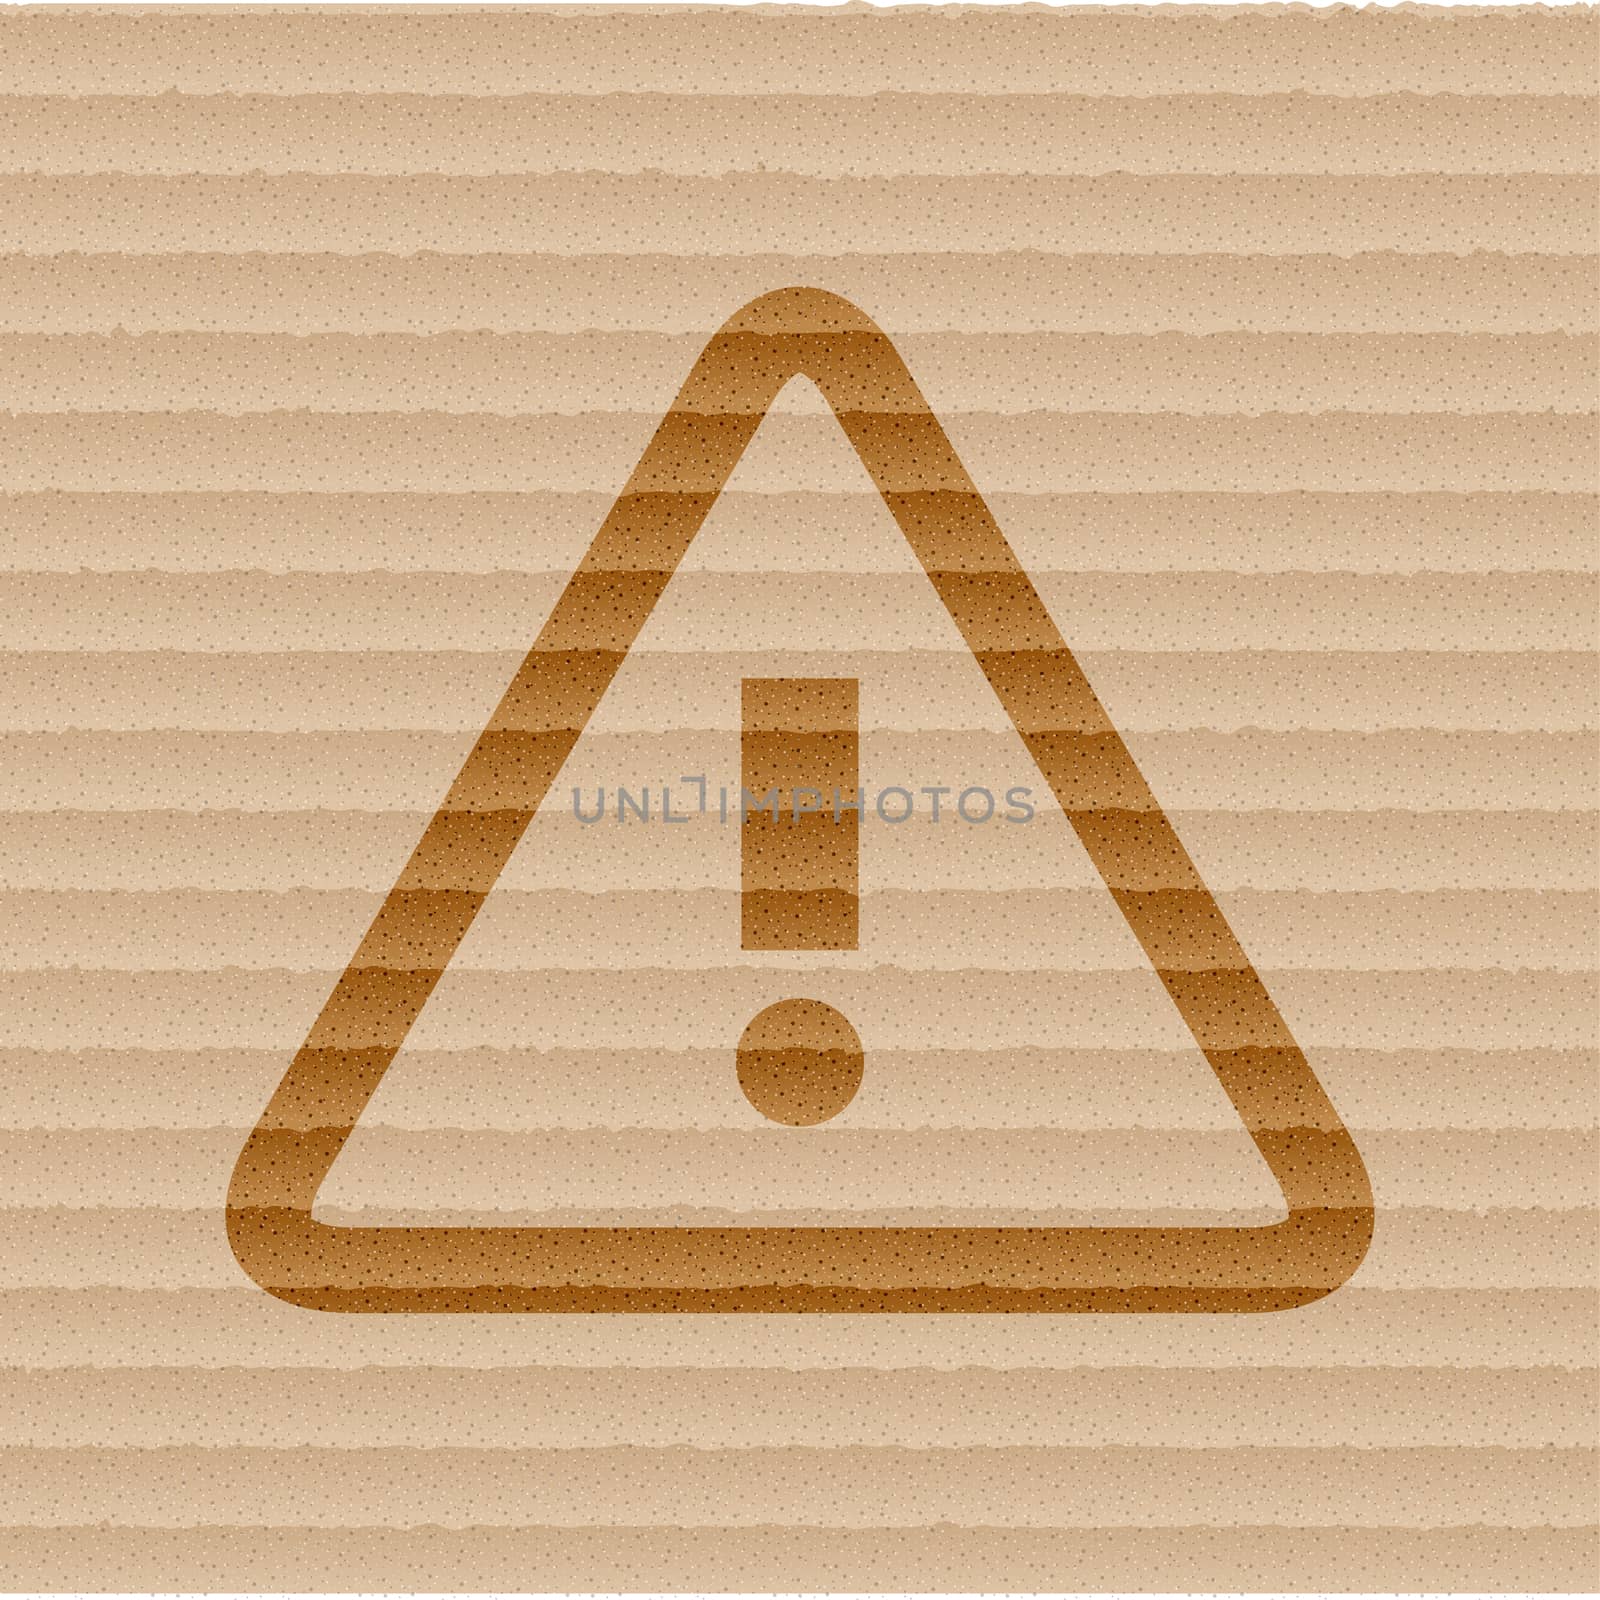 danger. exclamation mark icon flat design with abstract background by serhii_lohvyniuk